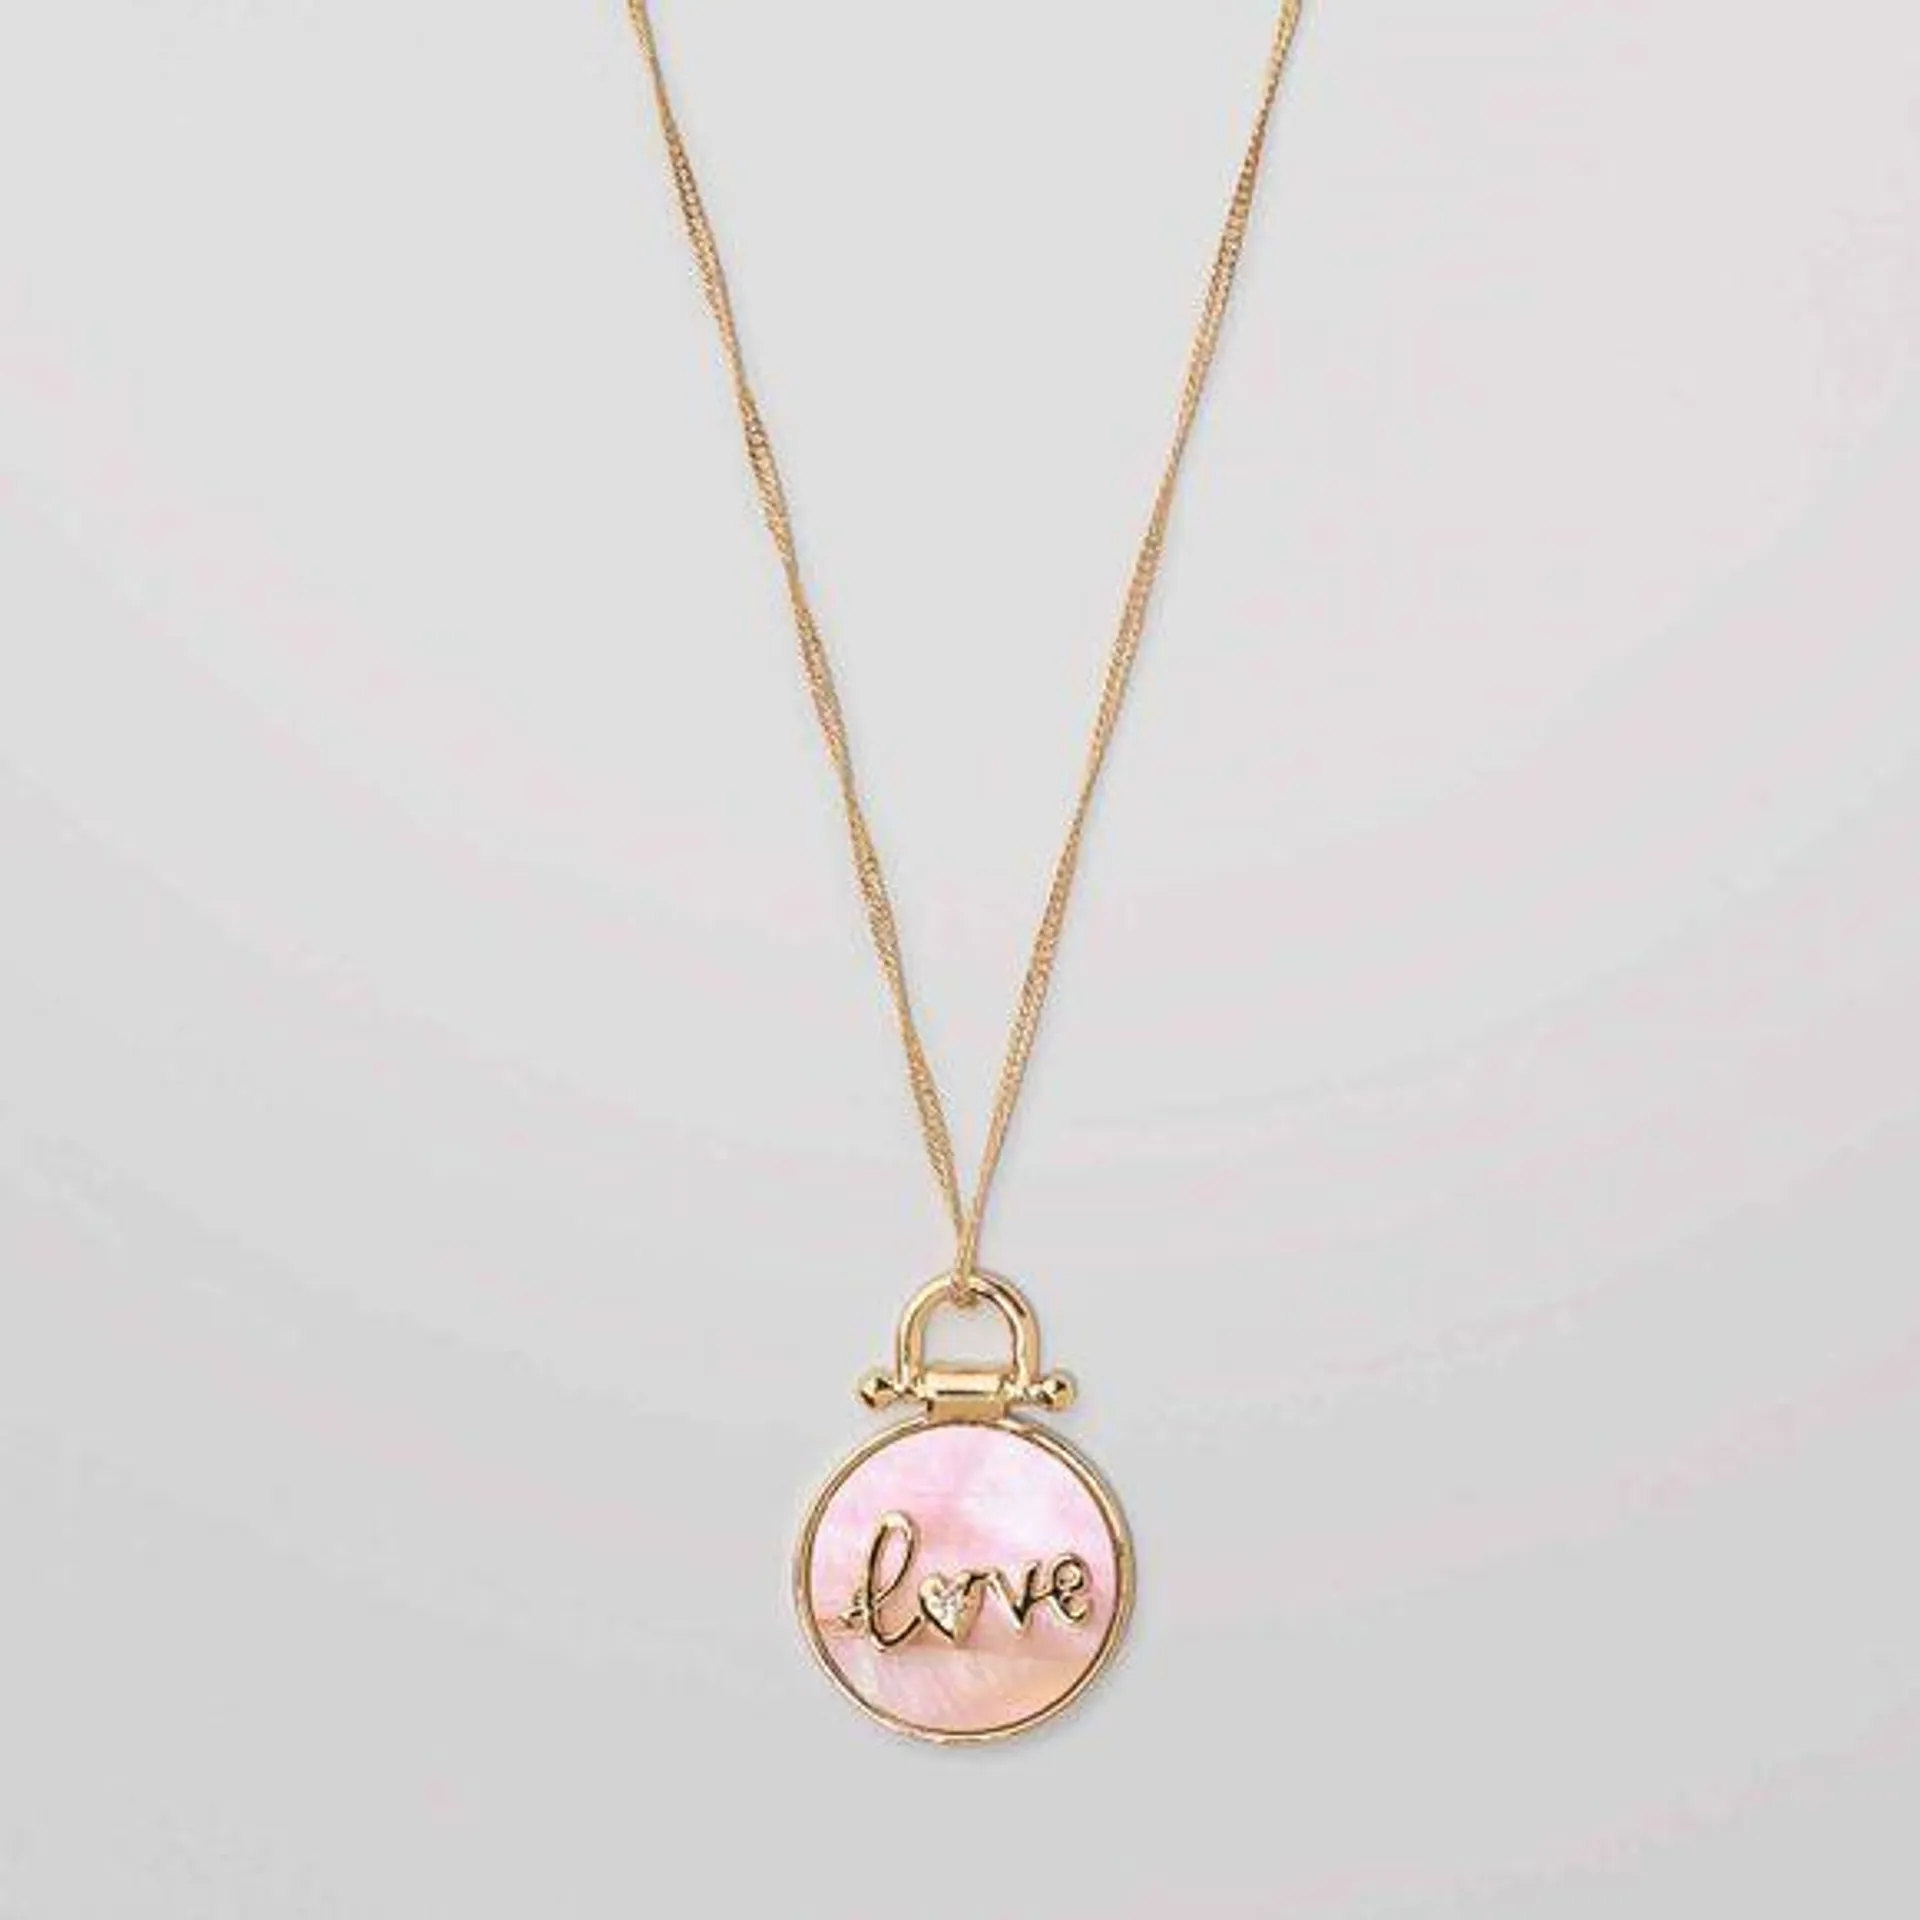 Meaningful Pendant Necklace